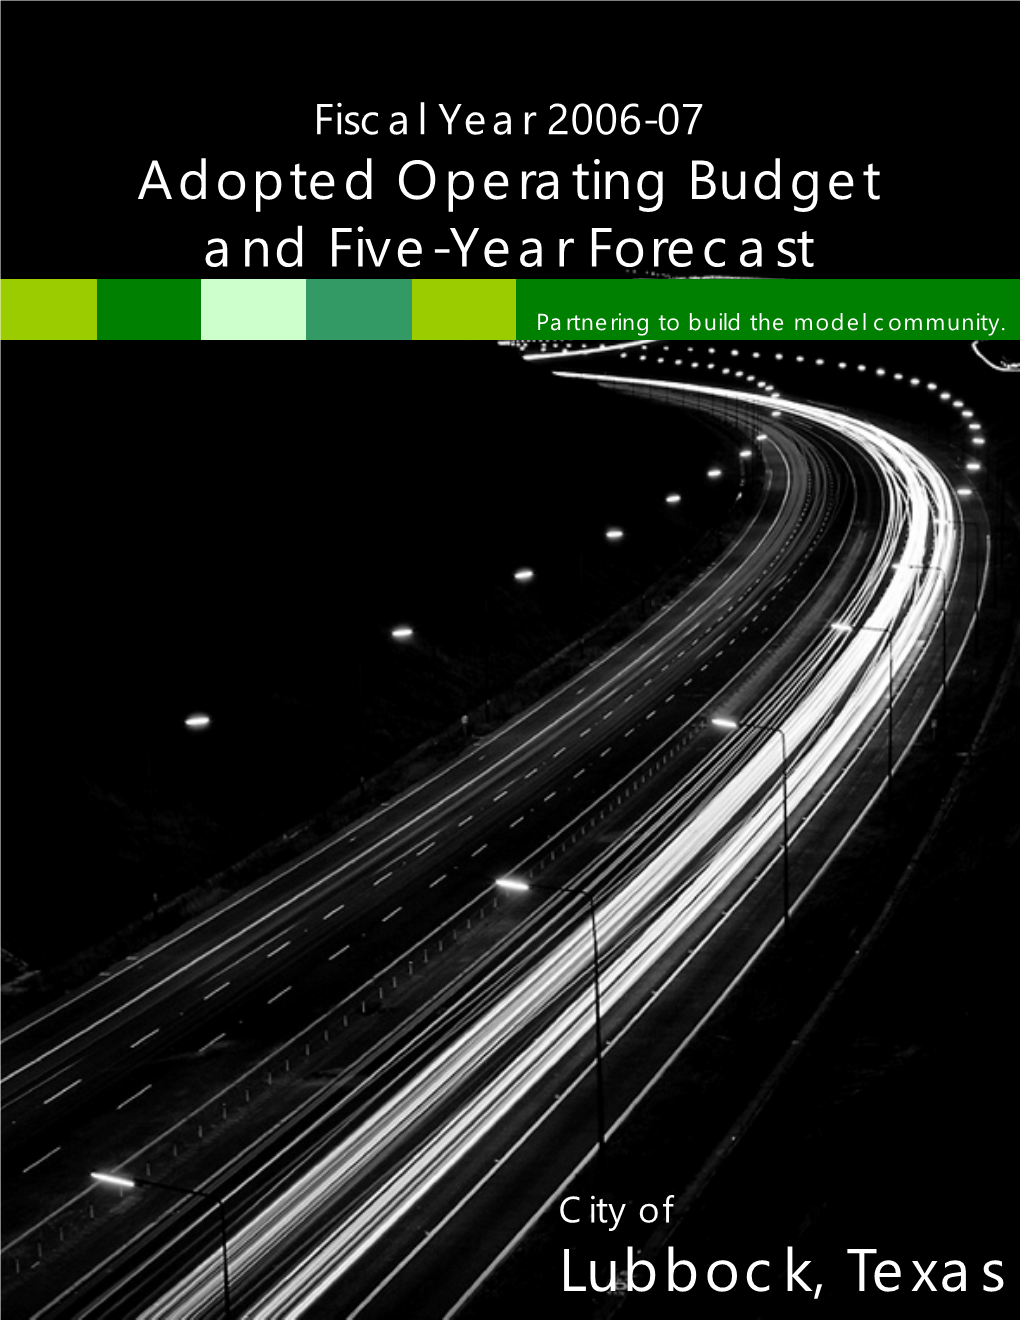 Adopted Operating Budget and Five-Year Forecast